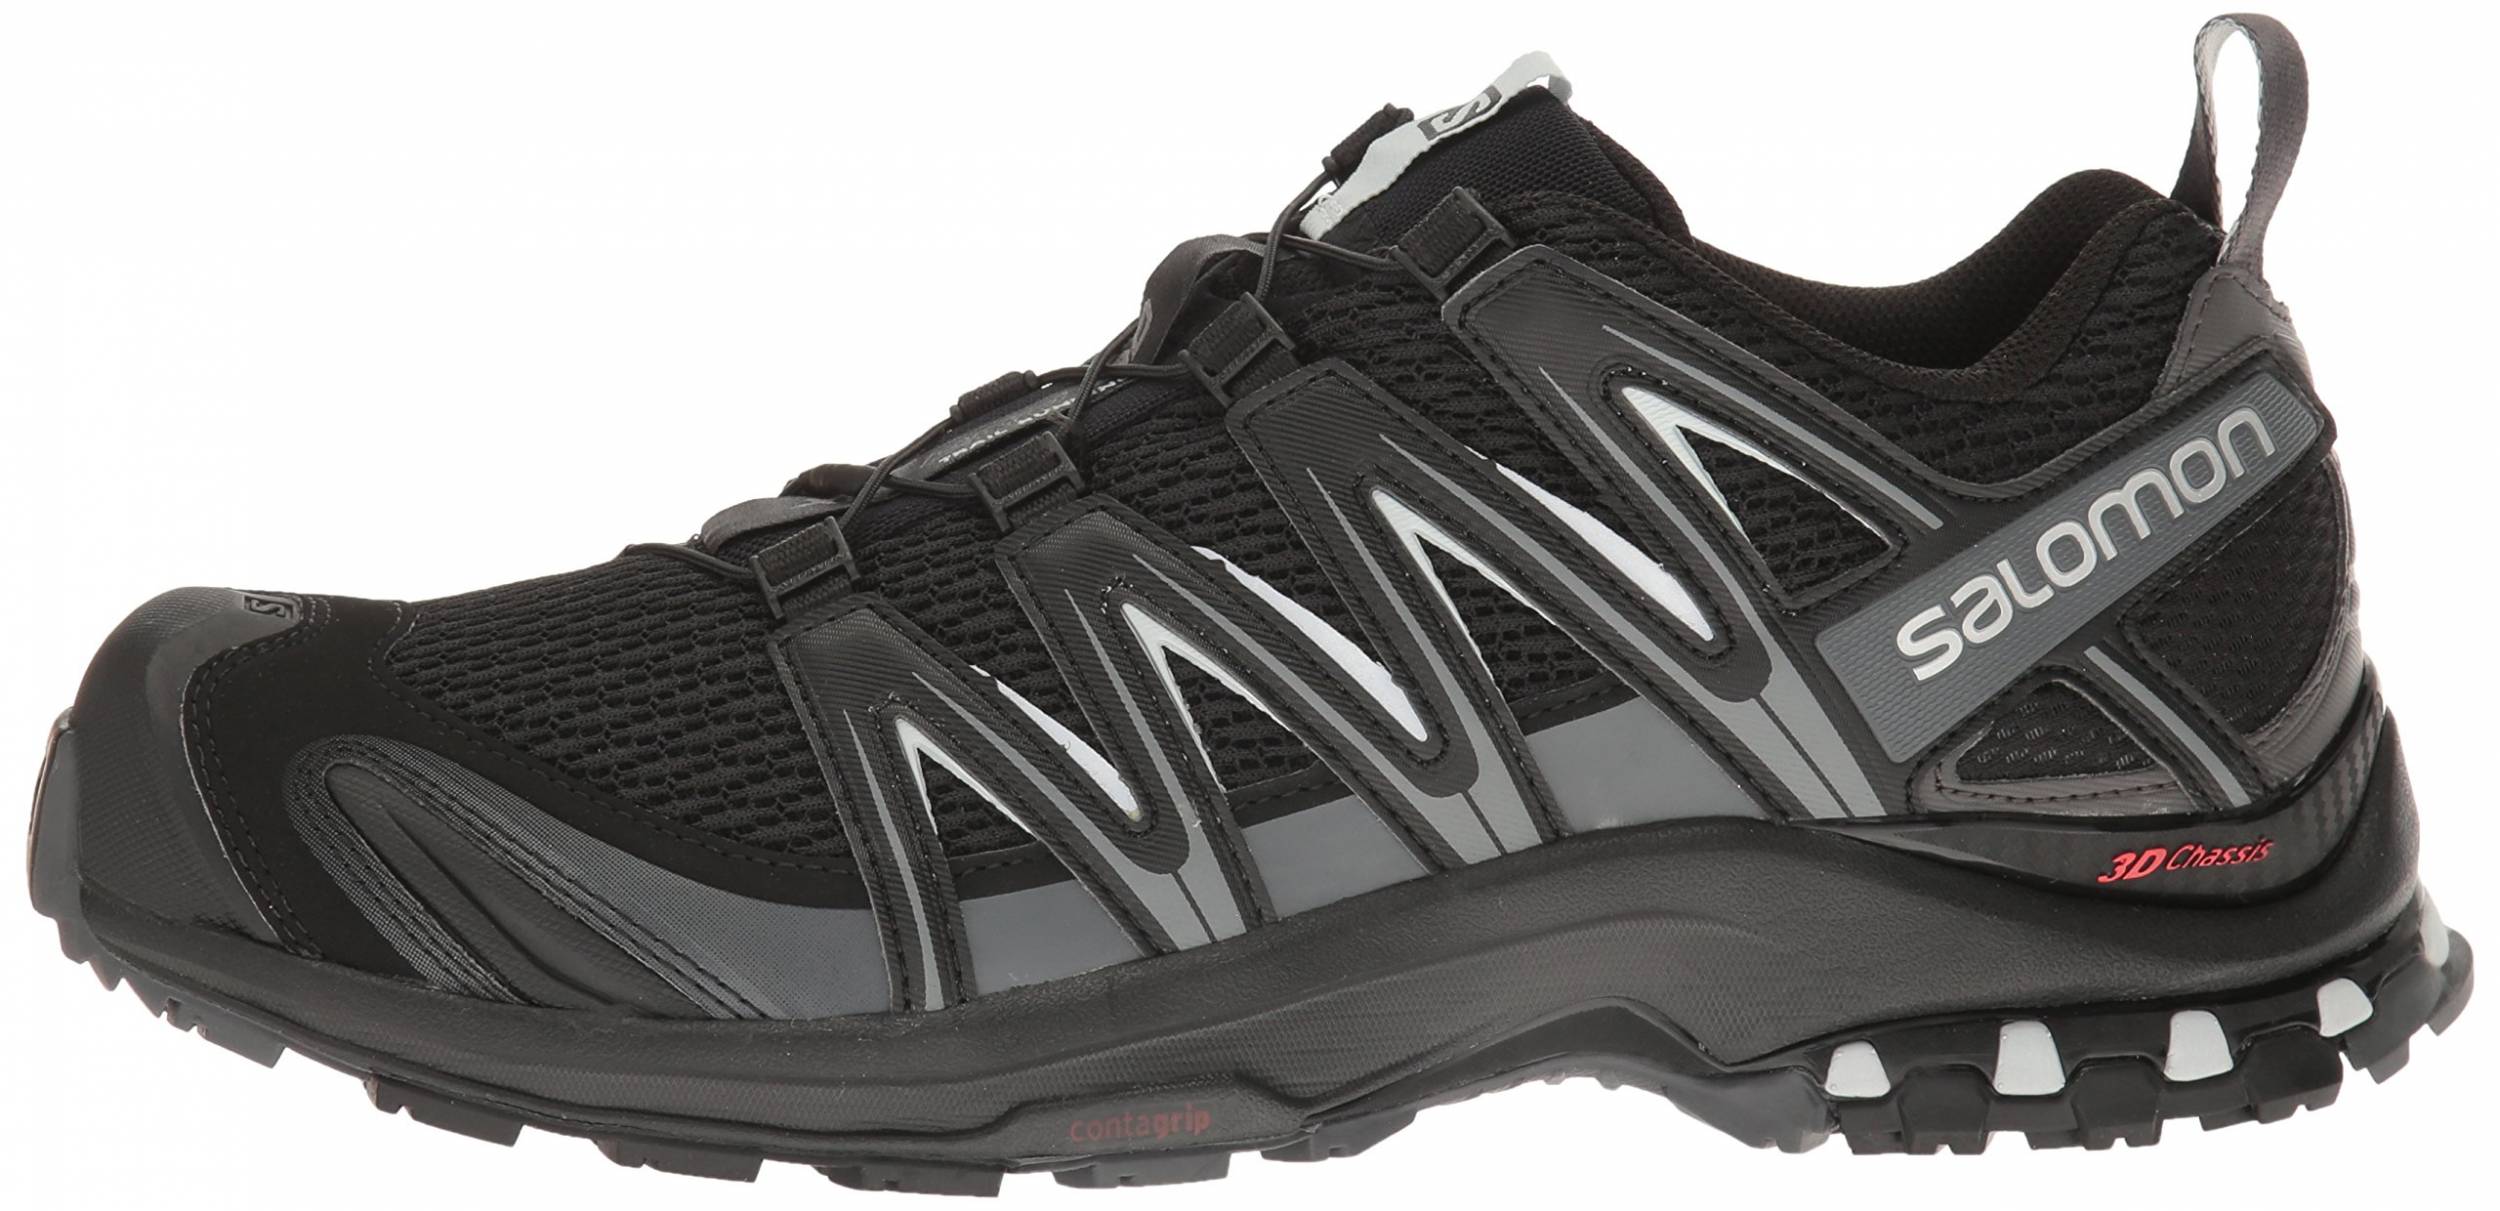 Only $99 + Review of Salomon XA Pro 3D 